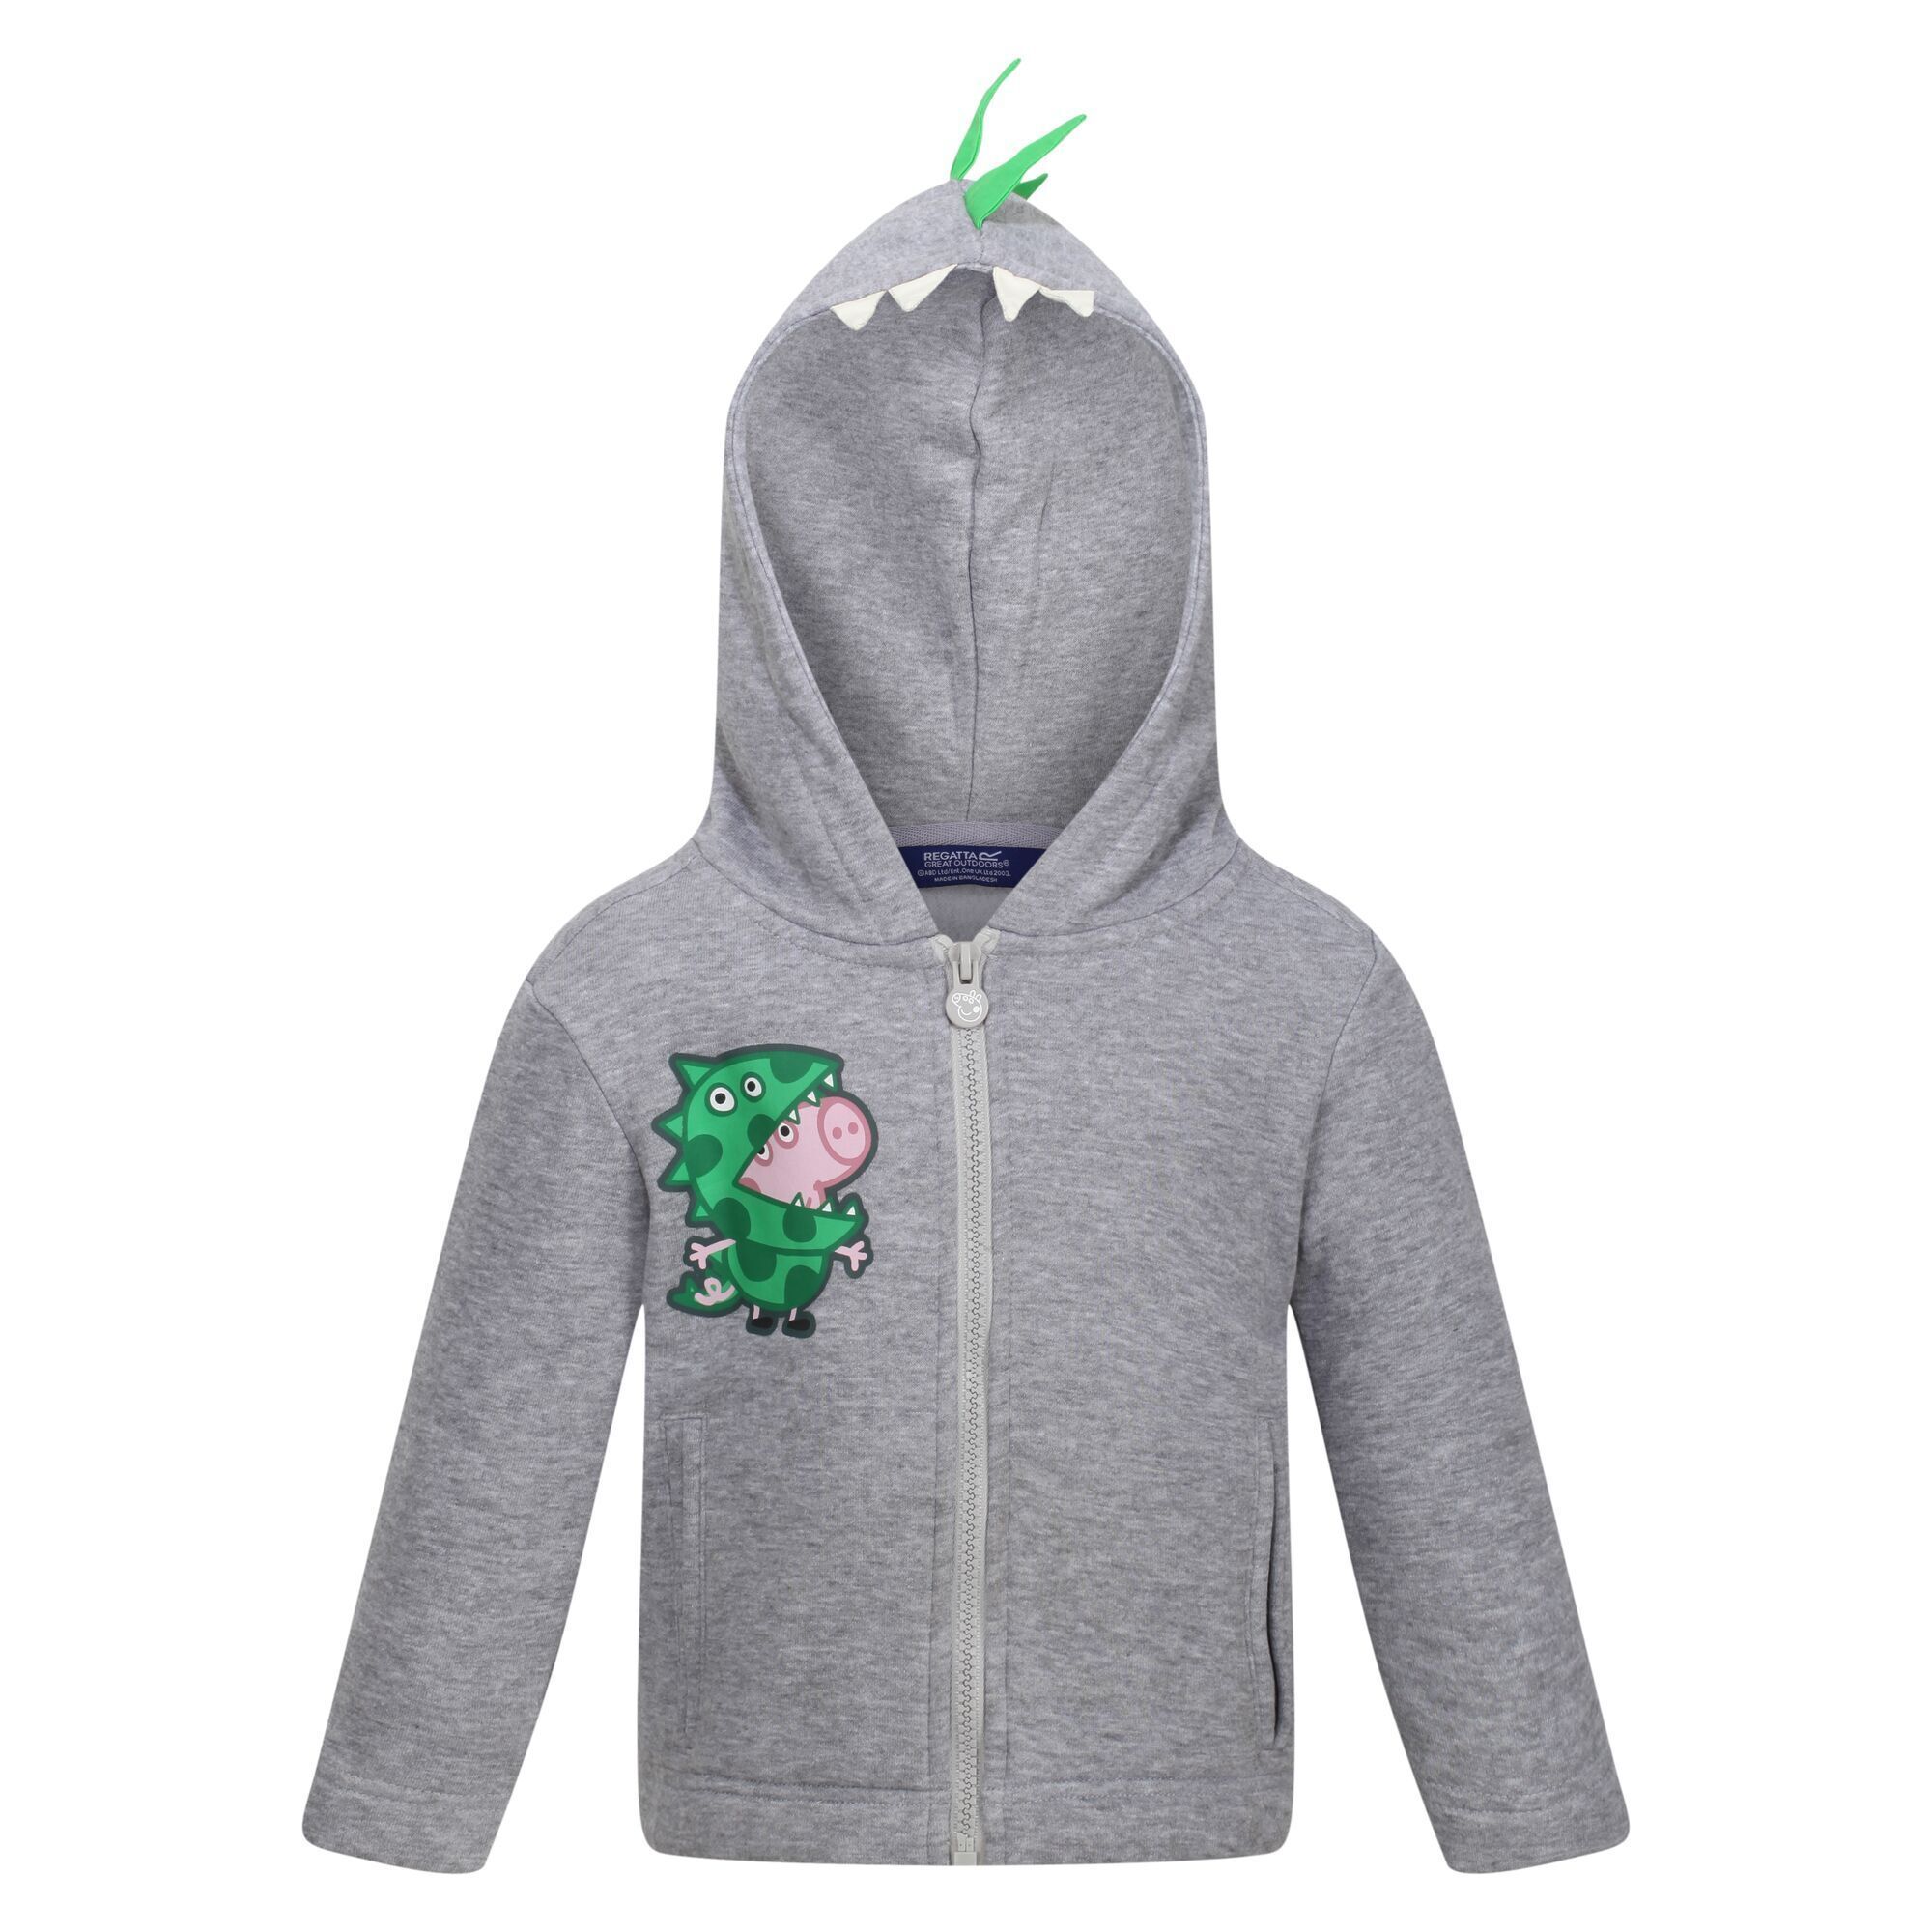 Material: 80% Cotton, 20% Polyester. Fabric: Fleece, Marl. Design: Dinosaur. Branded Tab, Branded Zip Pull. Neckline: Hooded. Sleeve-Type: Long-Sleeved. Hood Features: Grown On Hood. Pockets: 2 Side Pockets. Fastening: Full Zip. 100% Officially Licensed. Characters: George Pig.